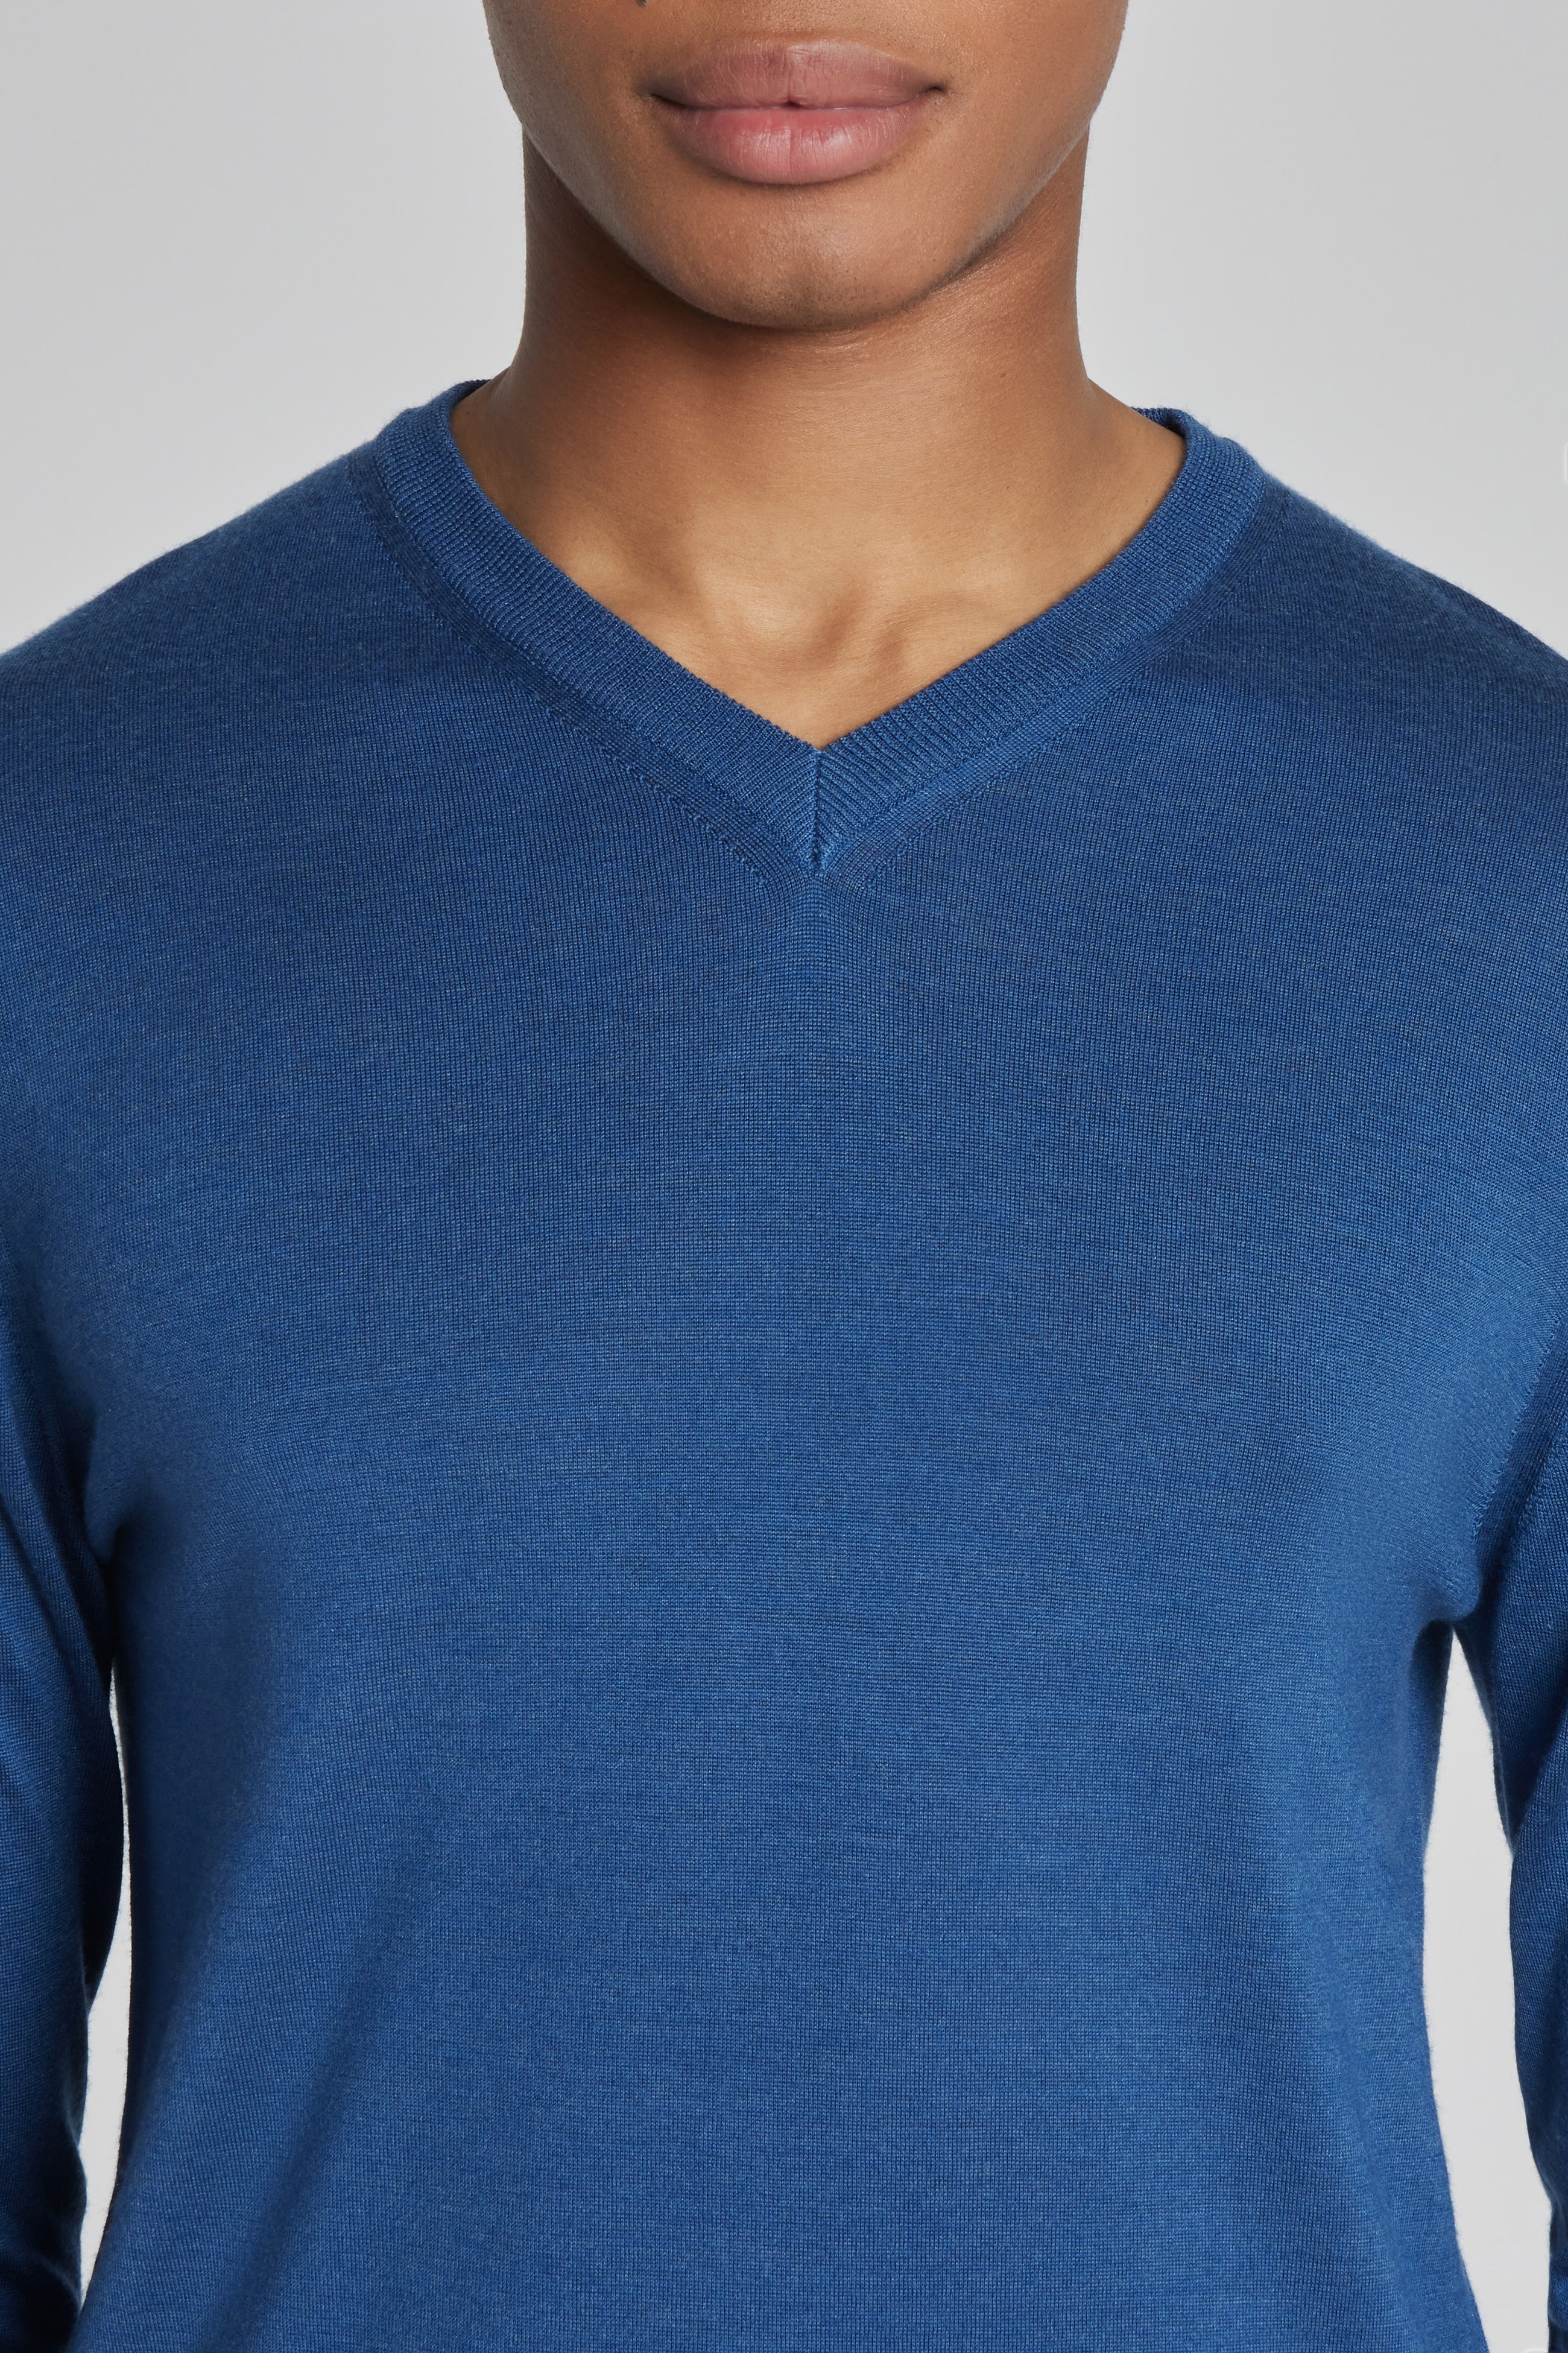 Alt view 1 Ramezay Wool, Silk and Cashmere V-Neck Sweater in Blue